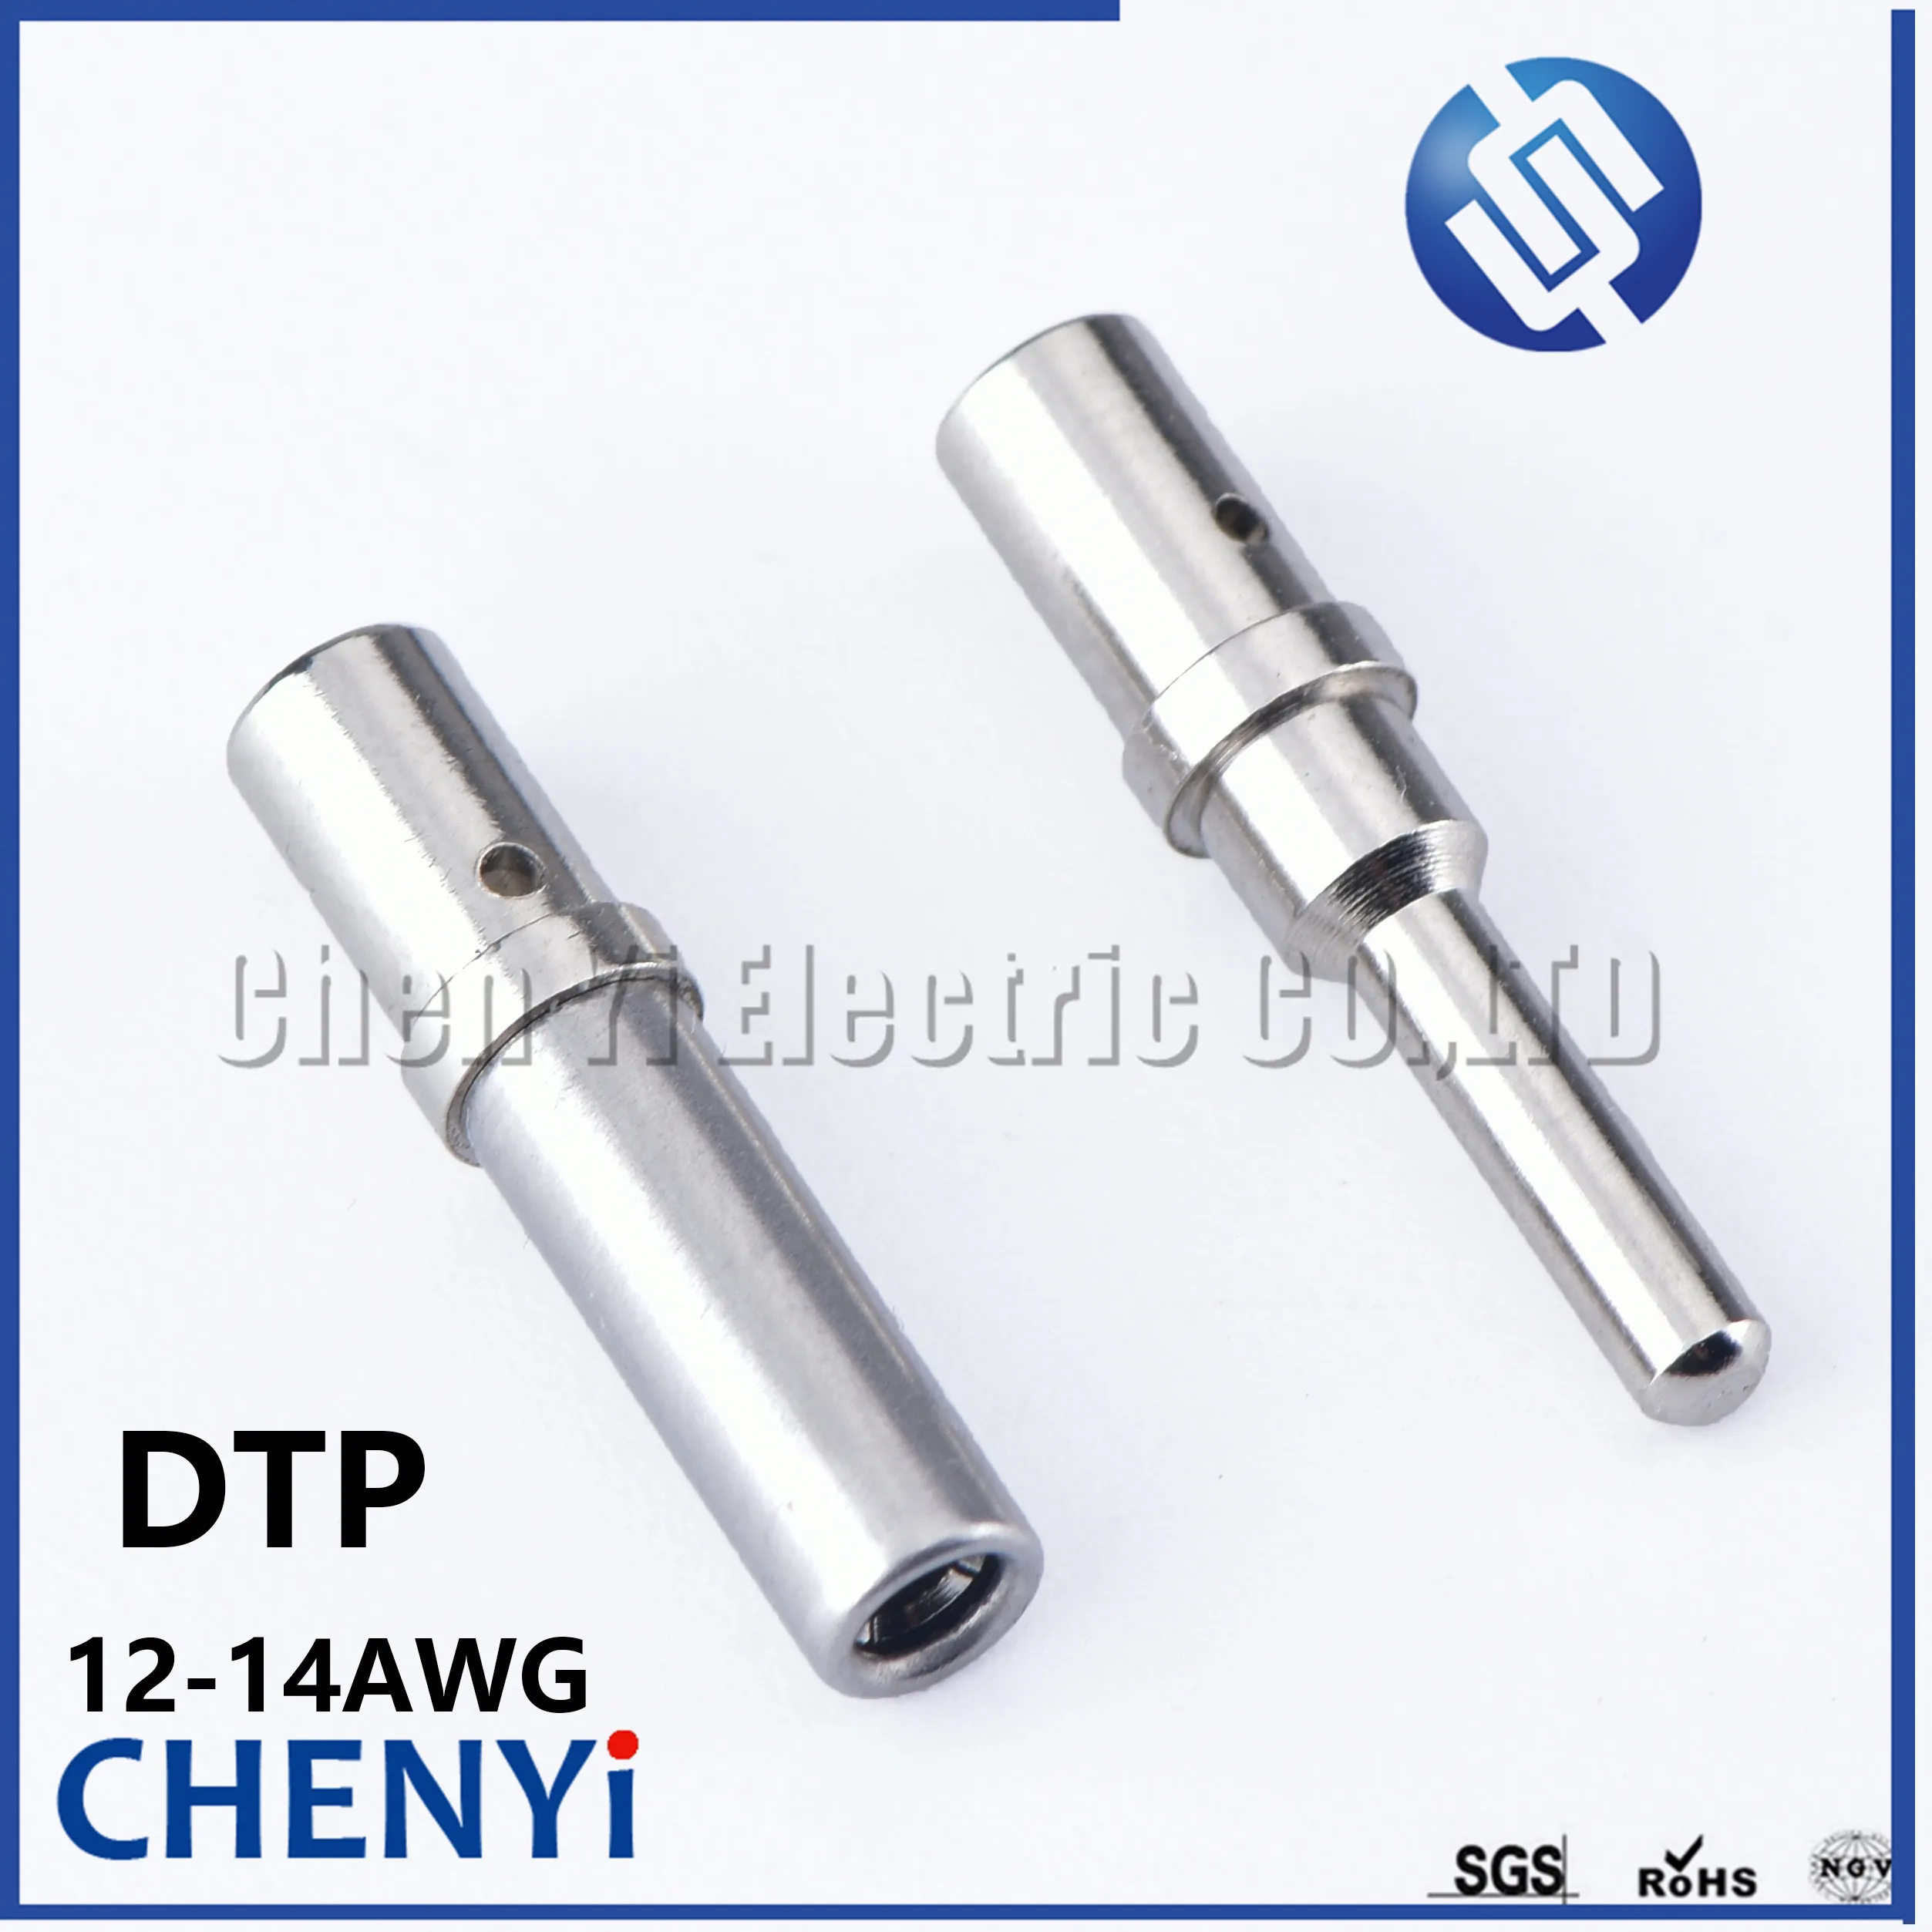 

10 Pcs Deutsch DTP 0462-203-12141 0460-204-12141 Stainless Steel solid Terminal Size 14-12AWG Pin automotive Connector Terminal